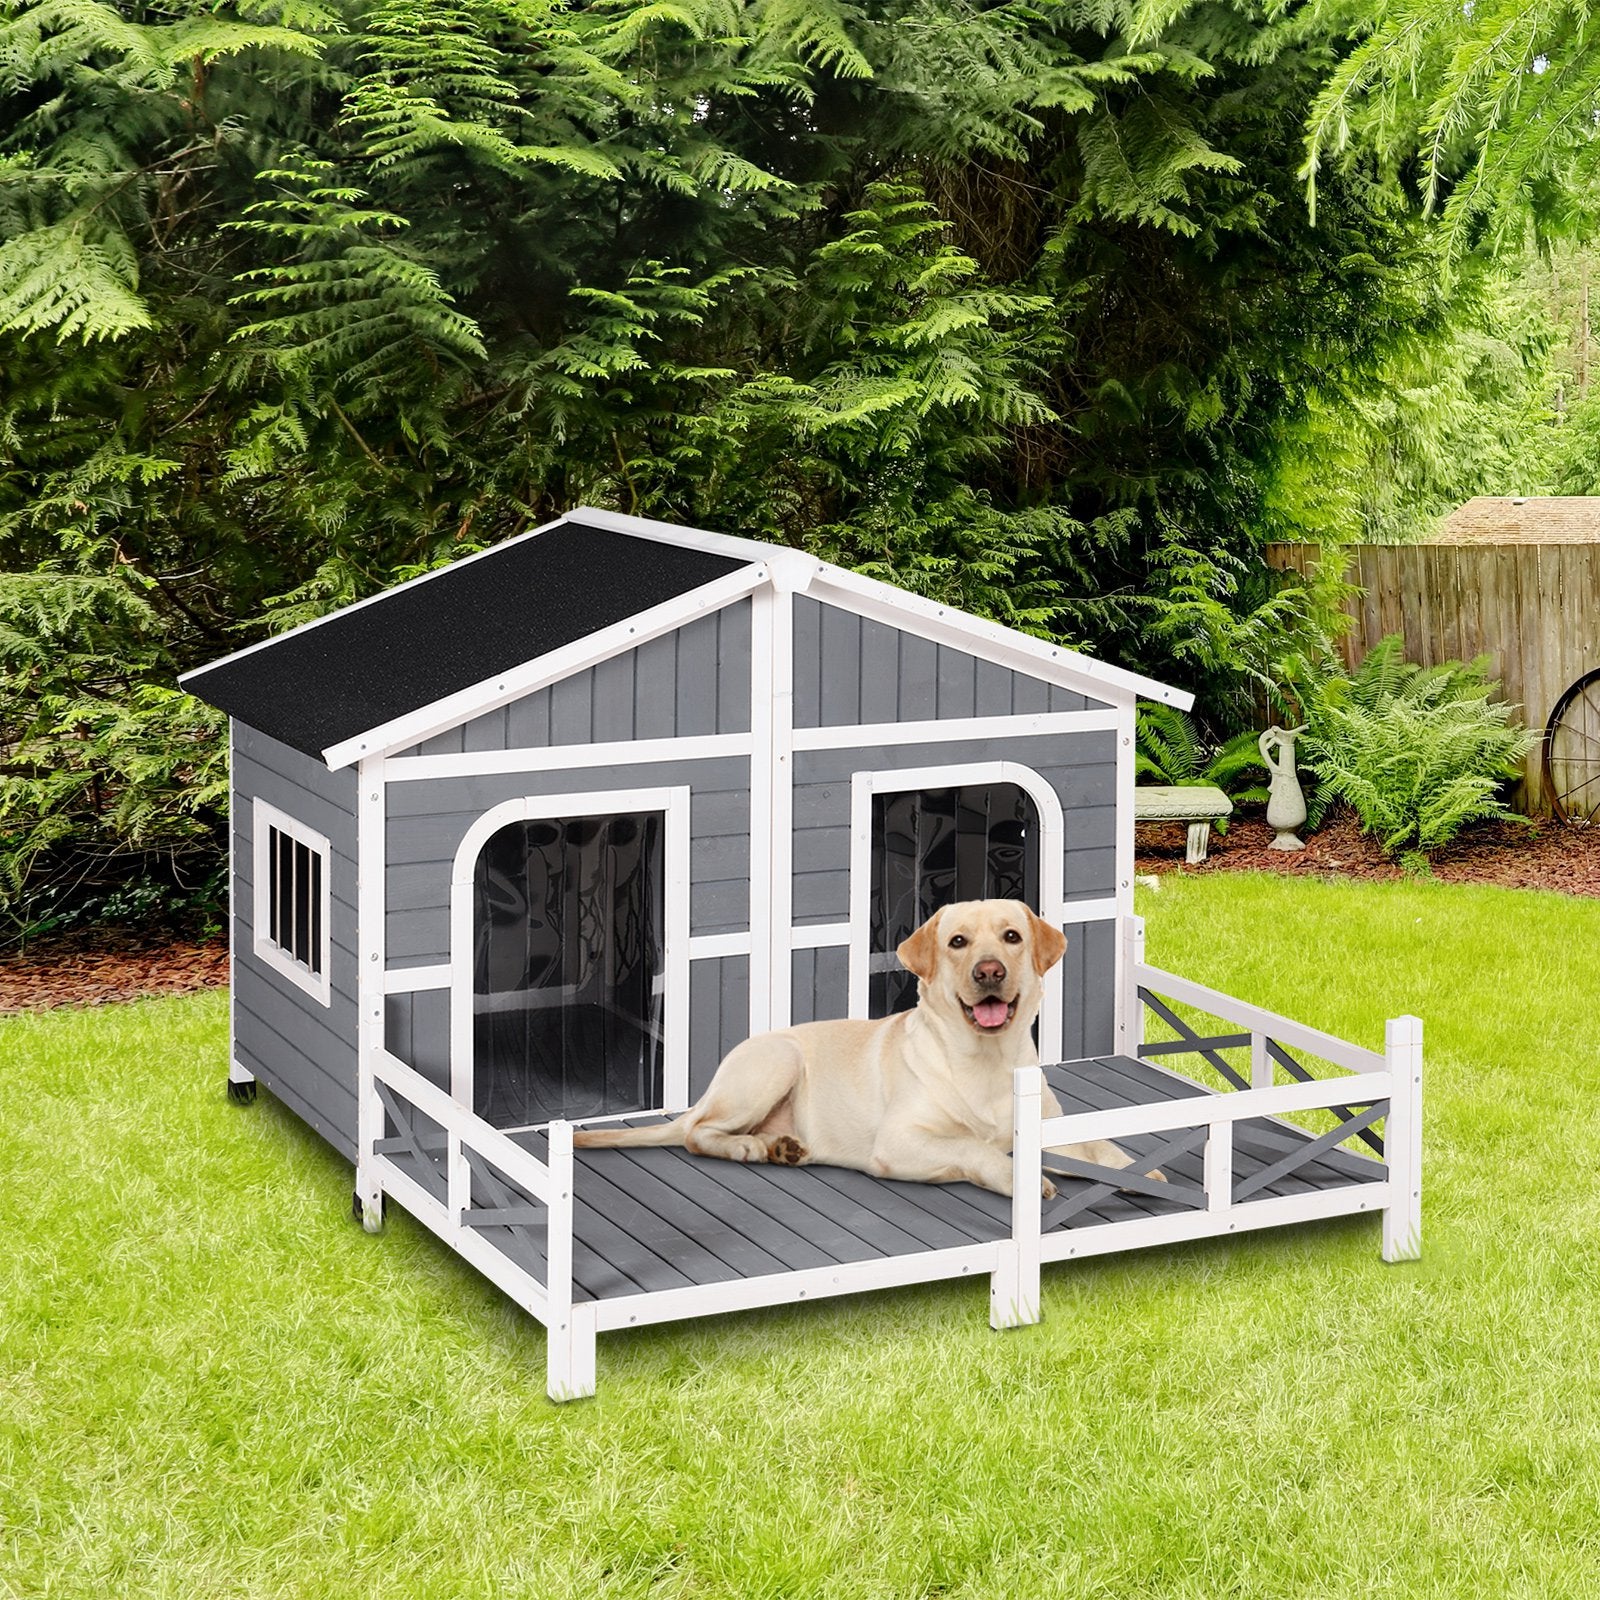 Festnight 59"X64"X39" Outdoor Dog House Weatherproof Rustic Log Cabin Style Wooden Raised Large Pet Shelter Nap W/ Porch